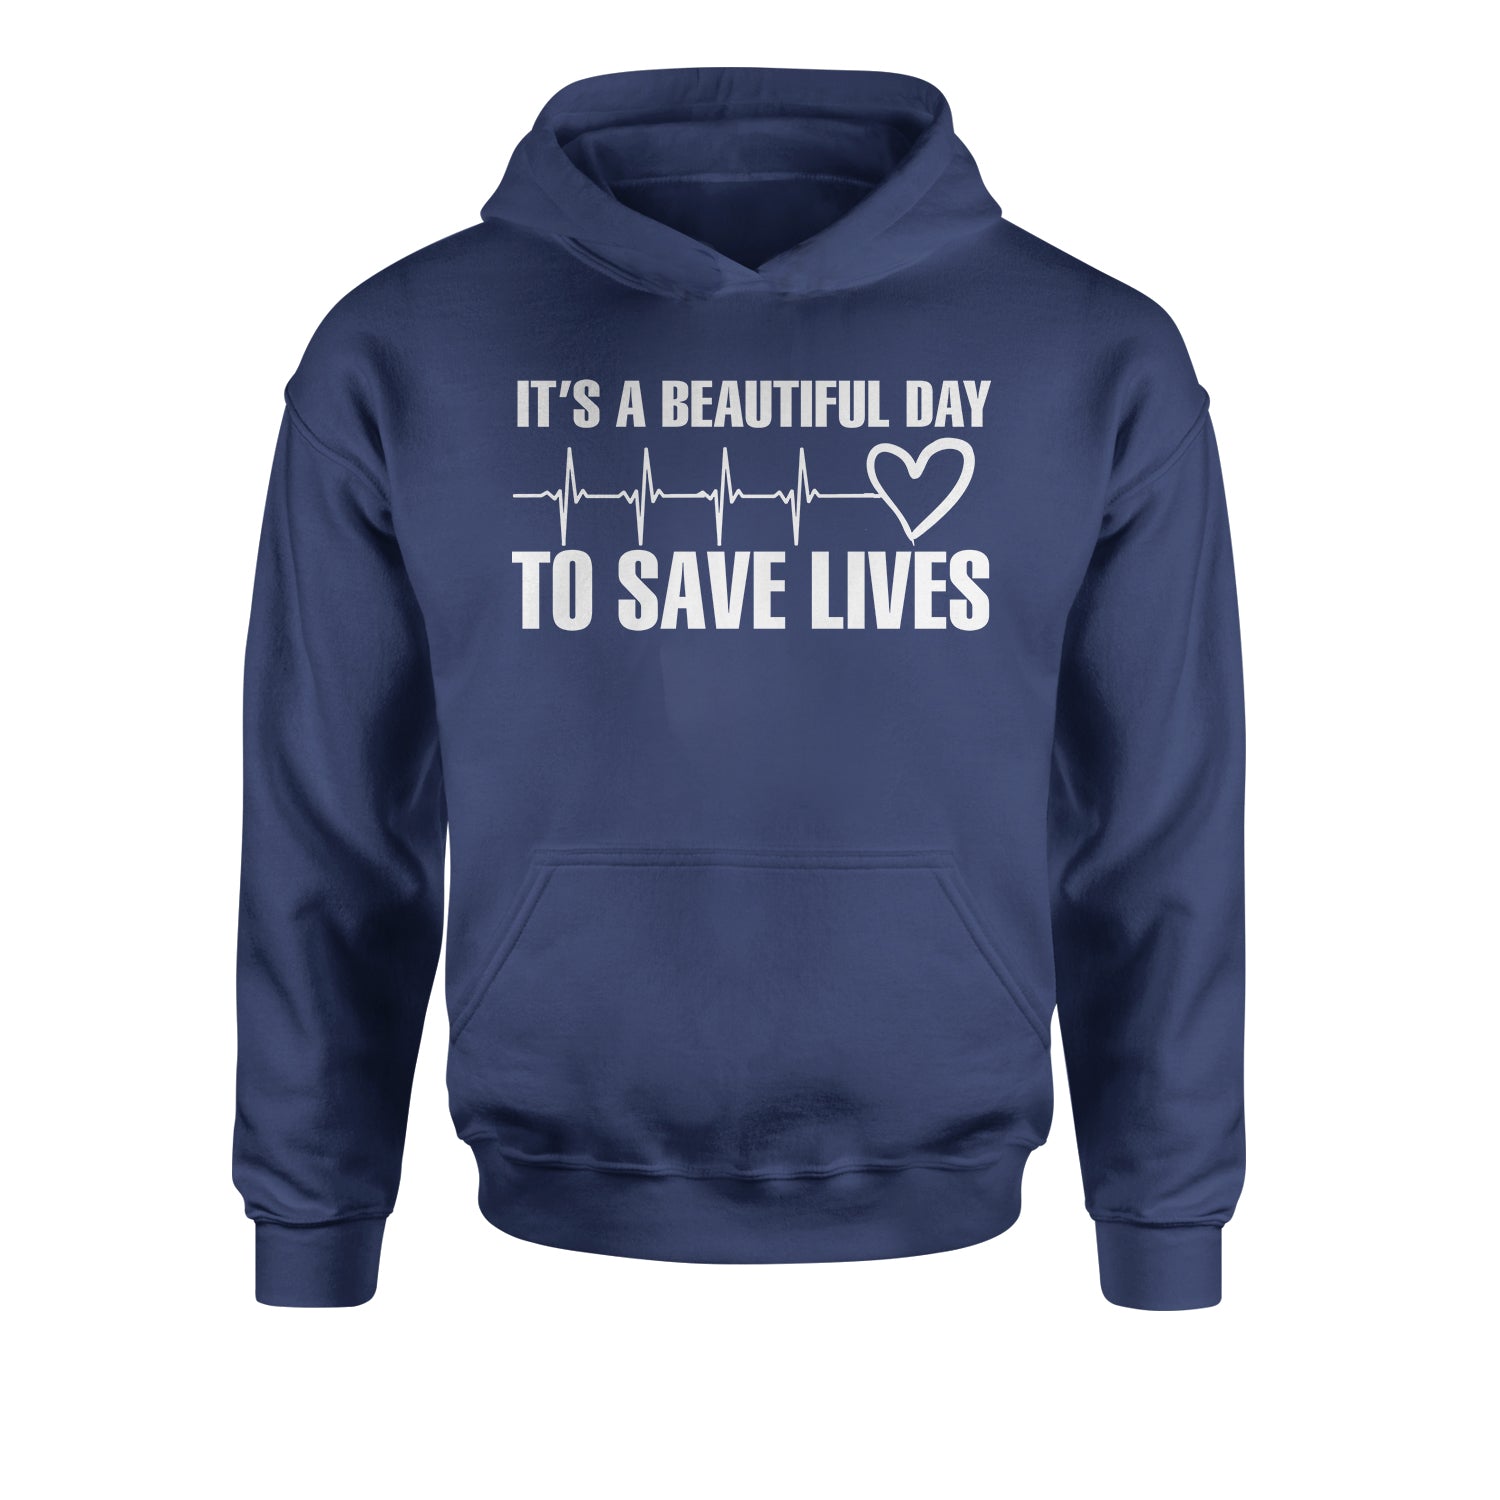 It's A Beautiful Day To Save Lives (White Print) Youth-Sized Hoodie #expressiontees by Expression Tees